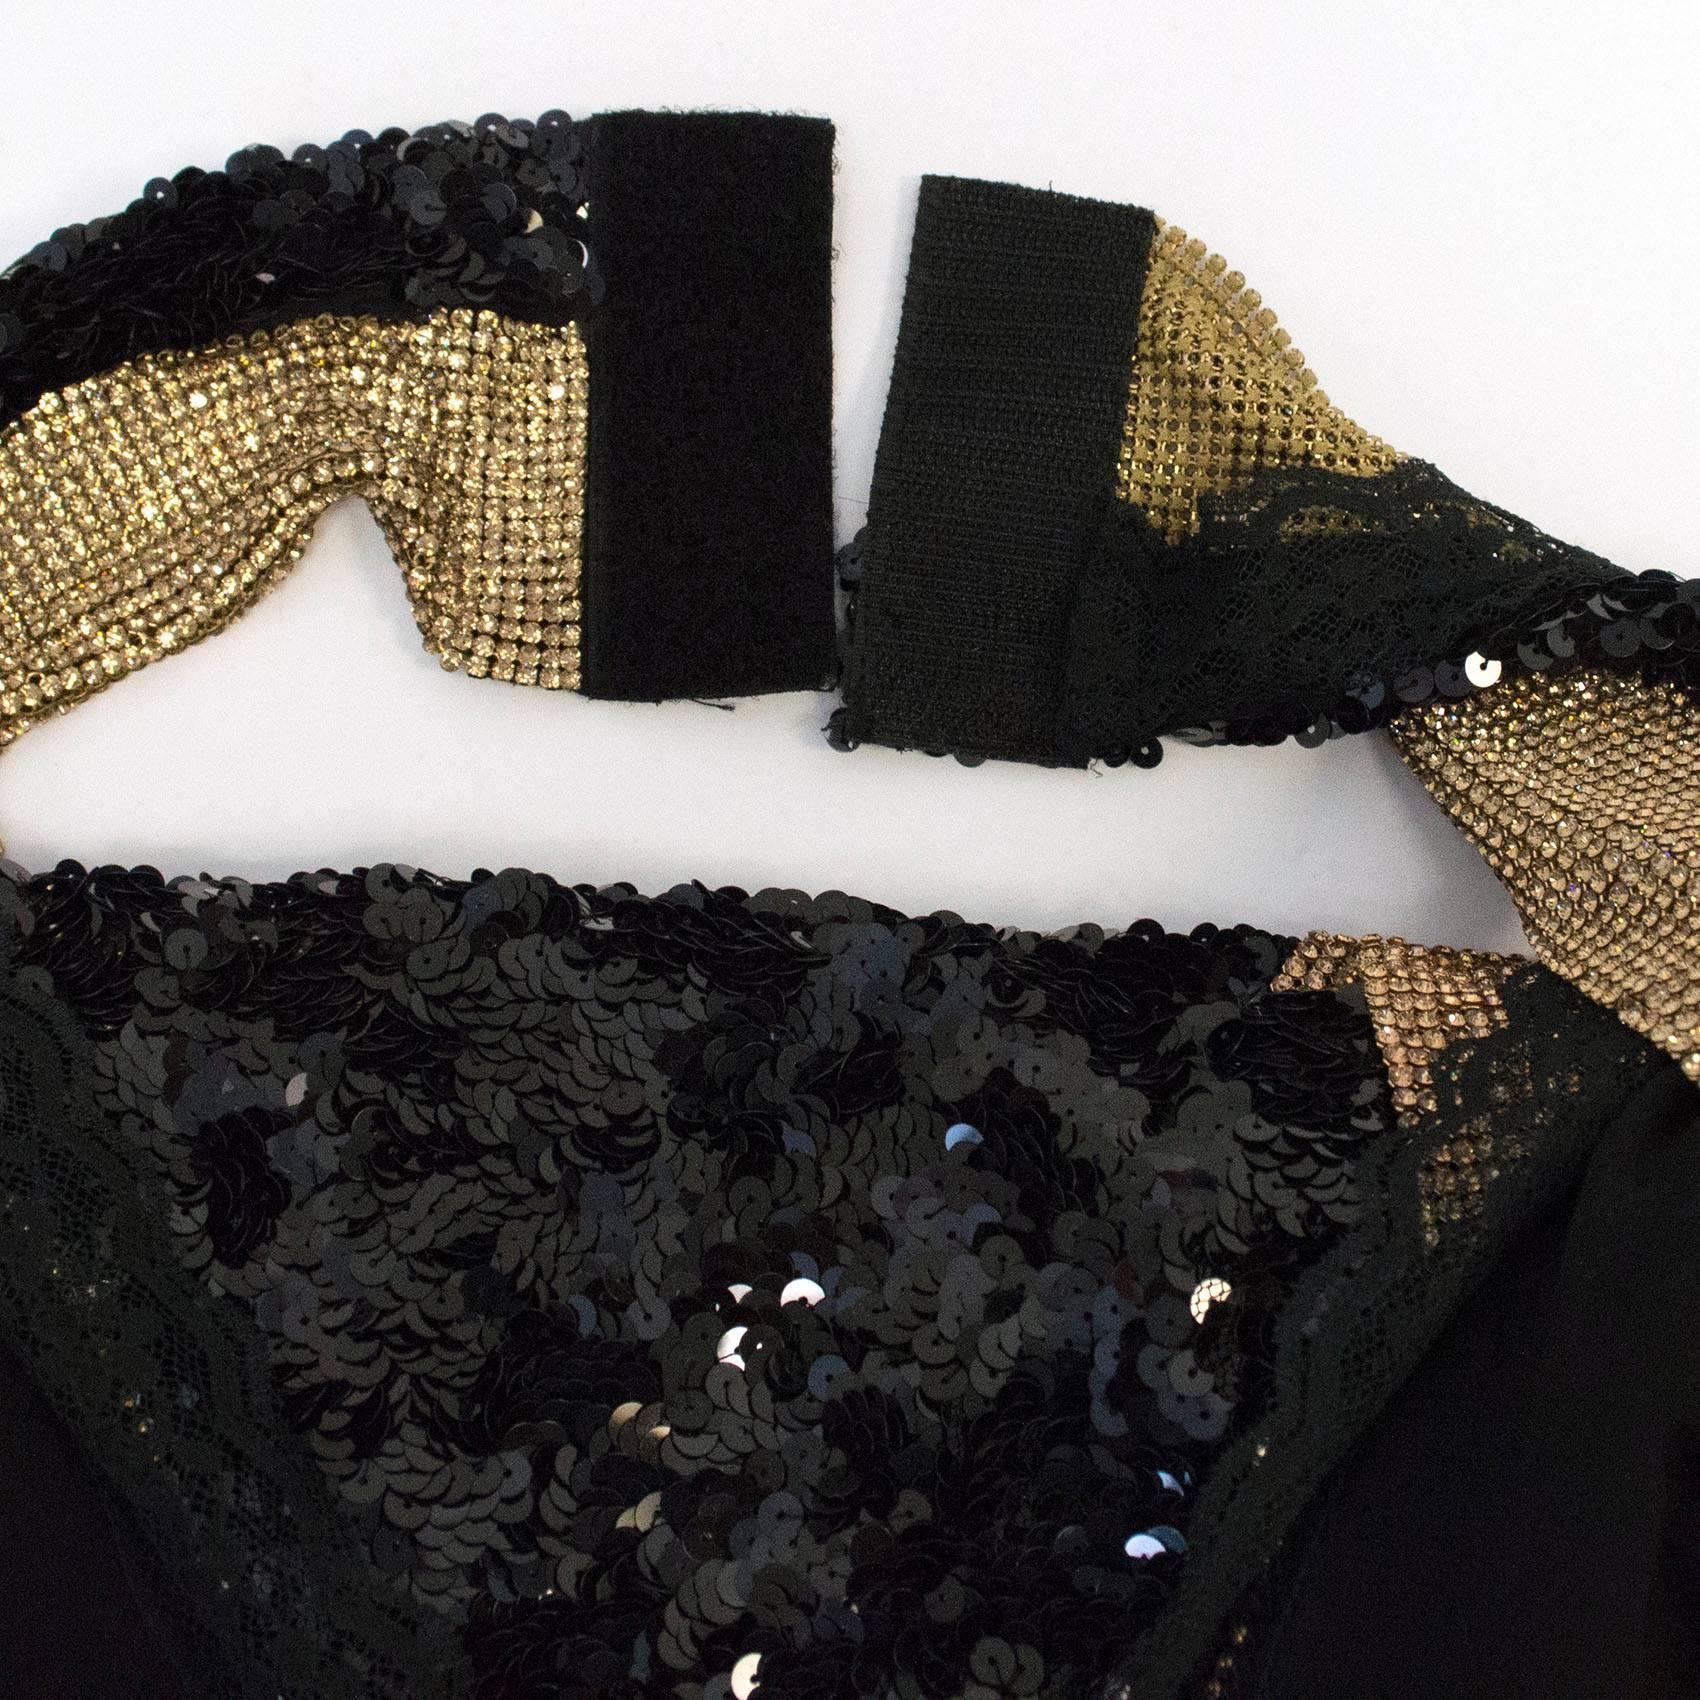 Dolce & Gabbana Bespoke Black and Gold Sequin and Crystal Evening Gown For Sale 1